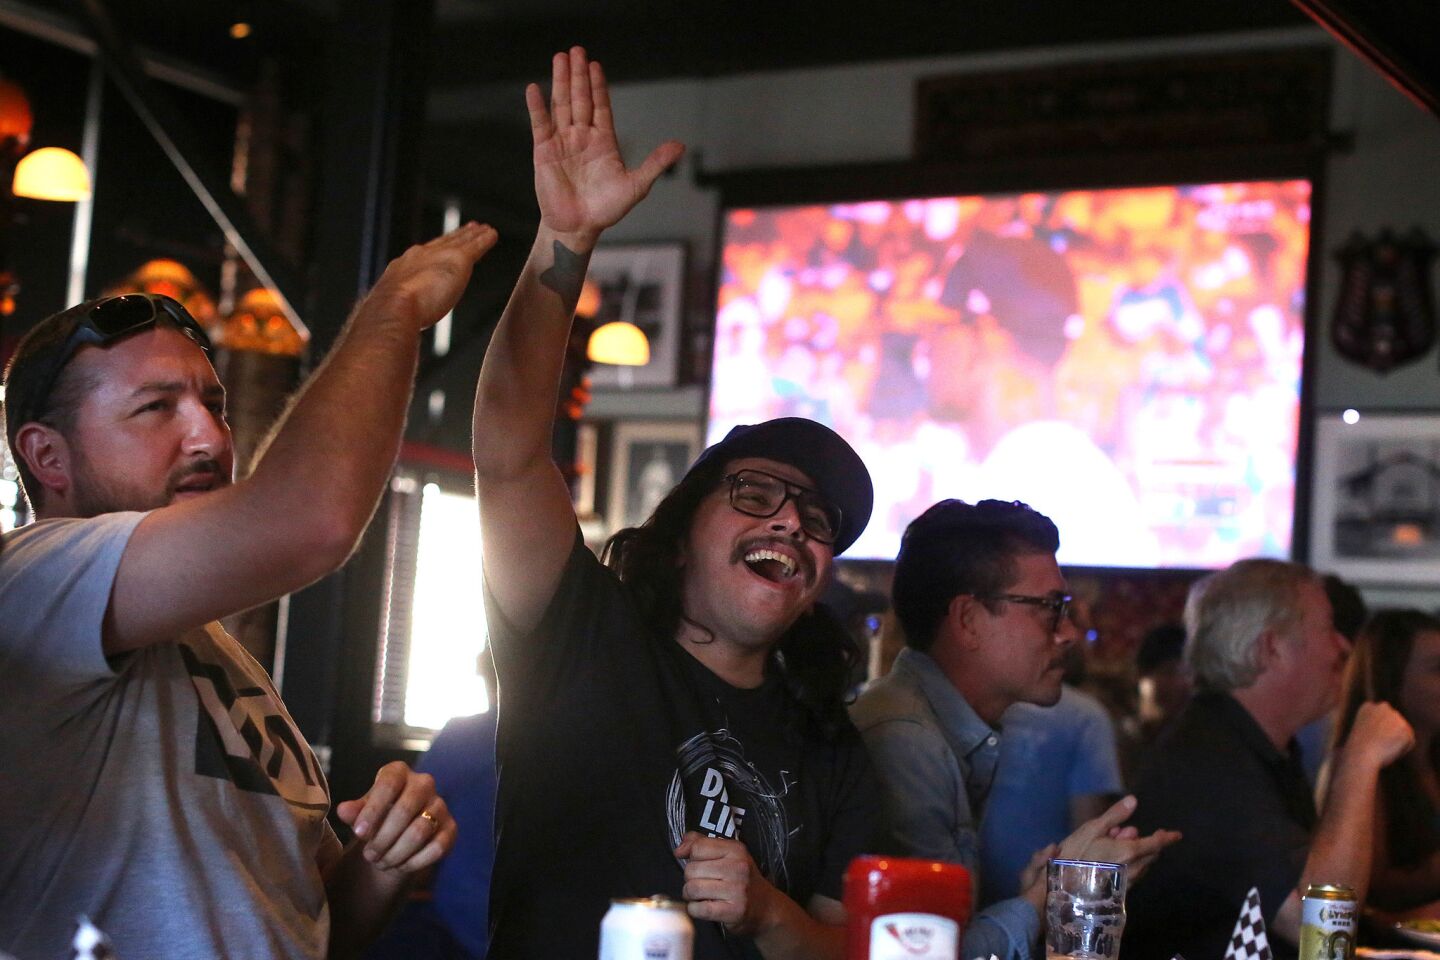 George Montejano, 33, of South Pasadena, and Jorge Pallares, 35, of Eagle Rock, cheer on the home team.